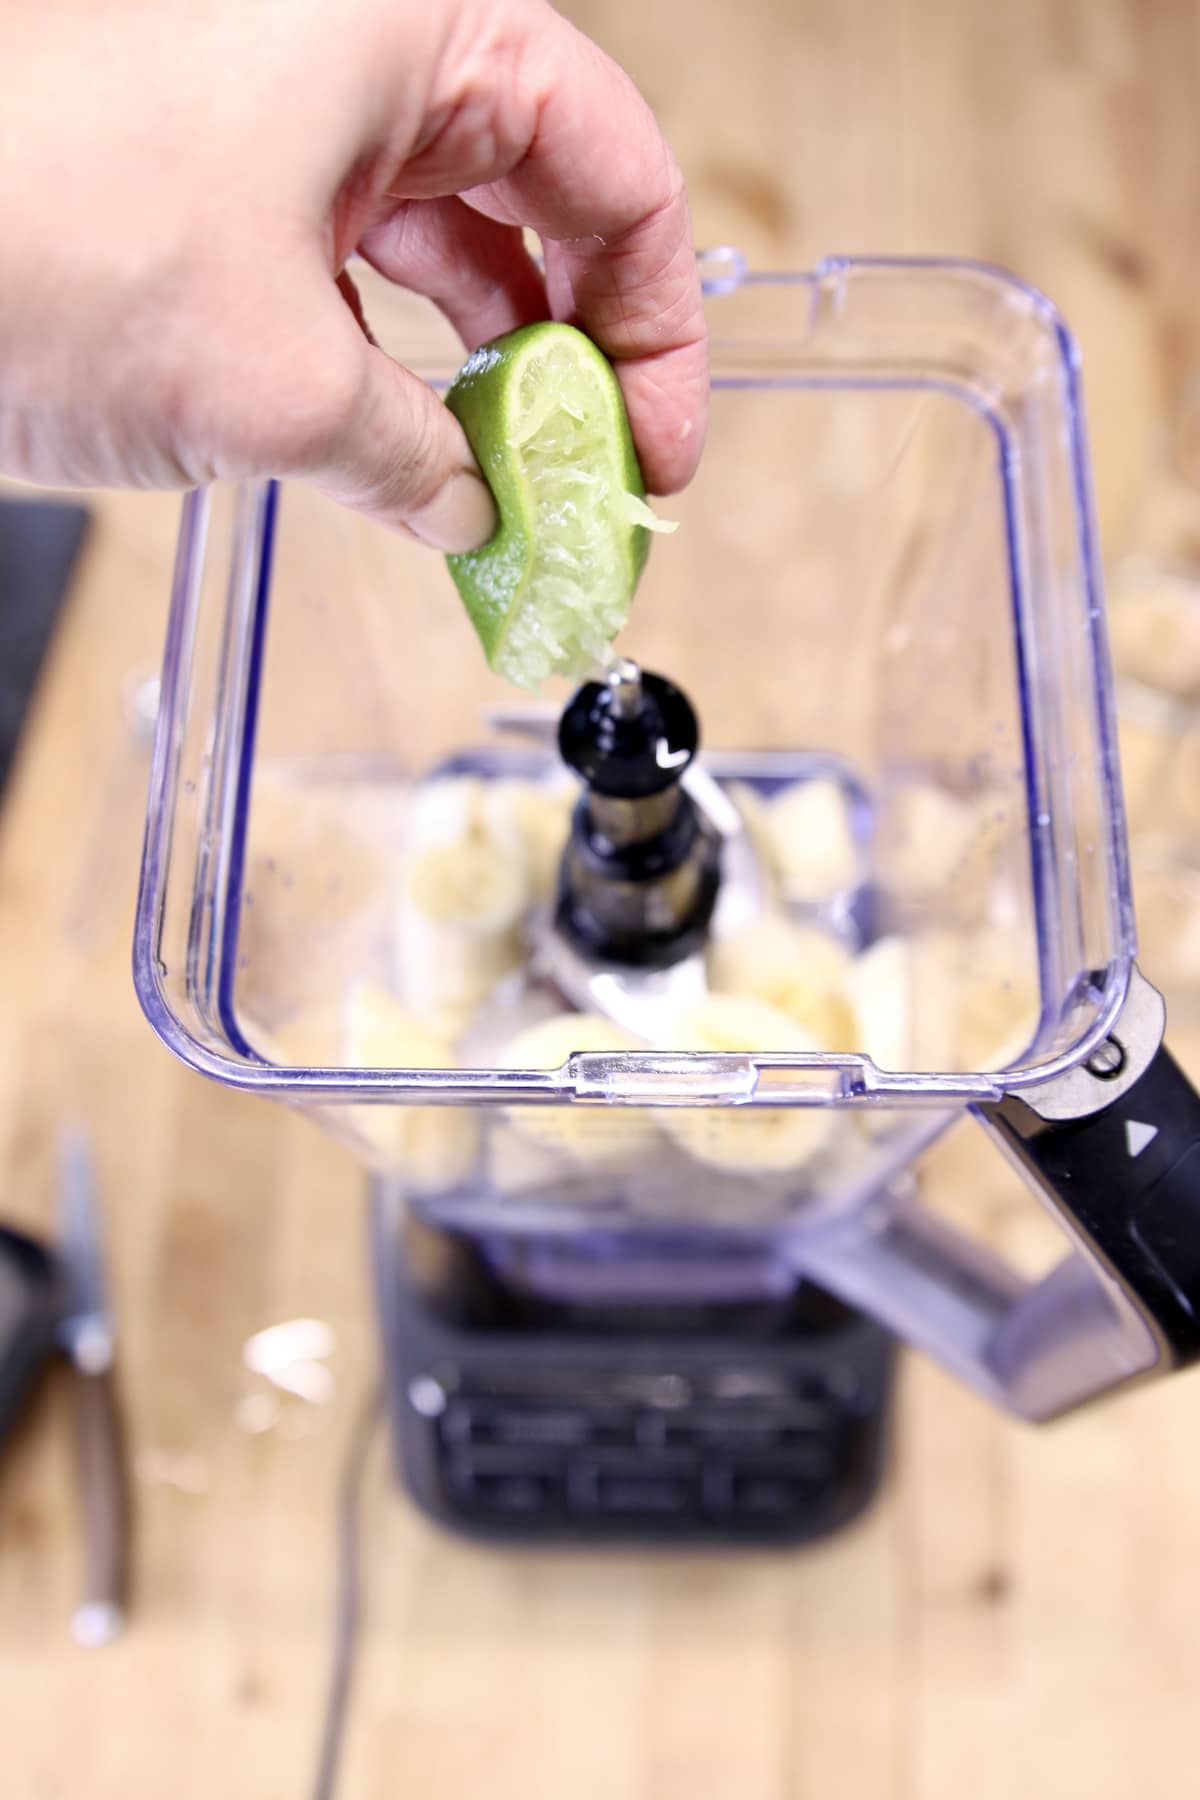 squeezing lime into blender.